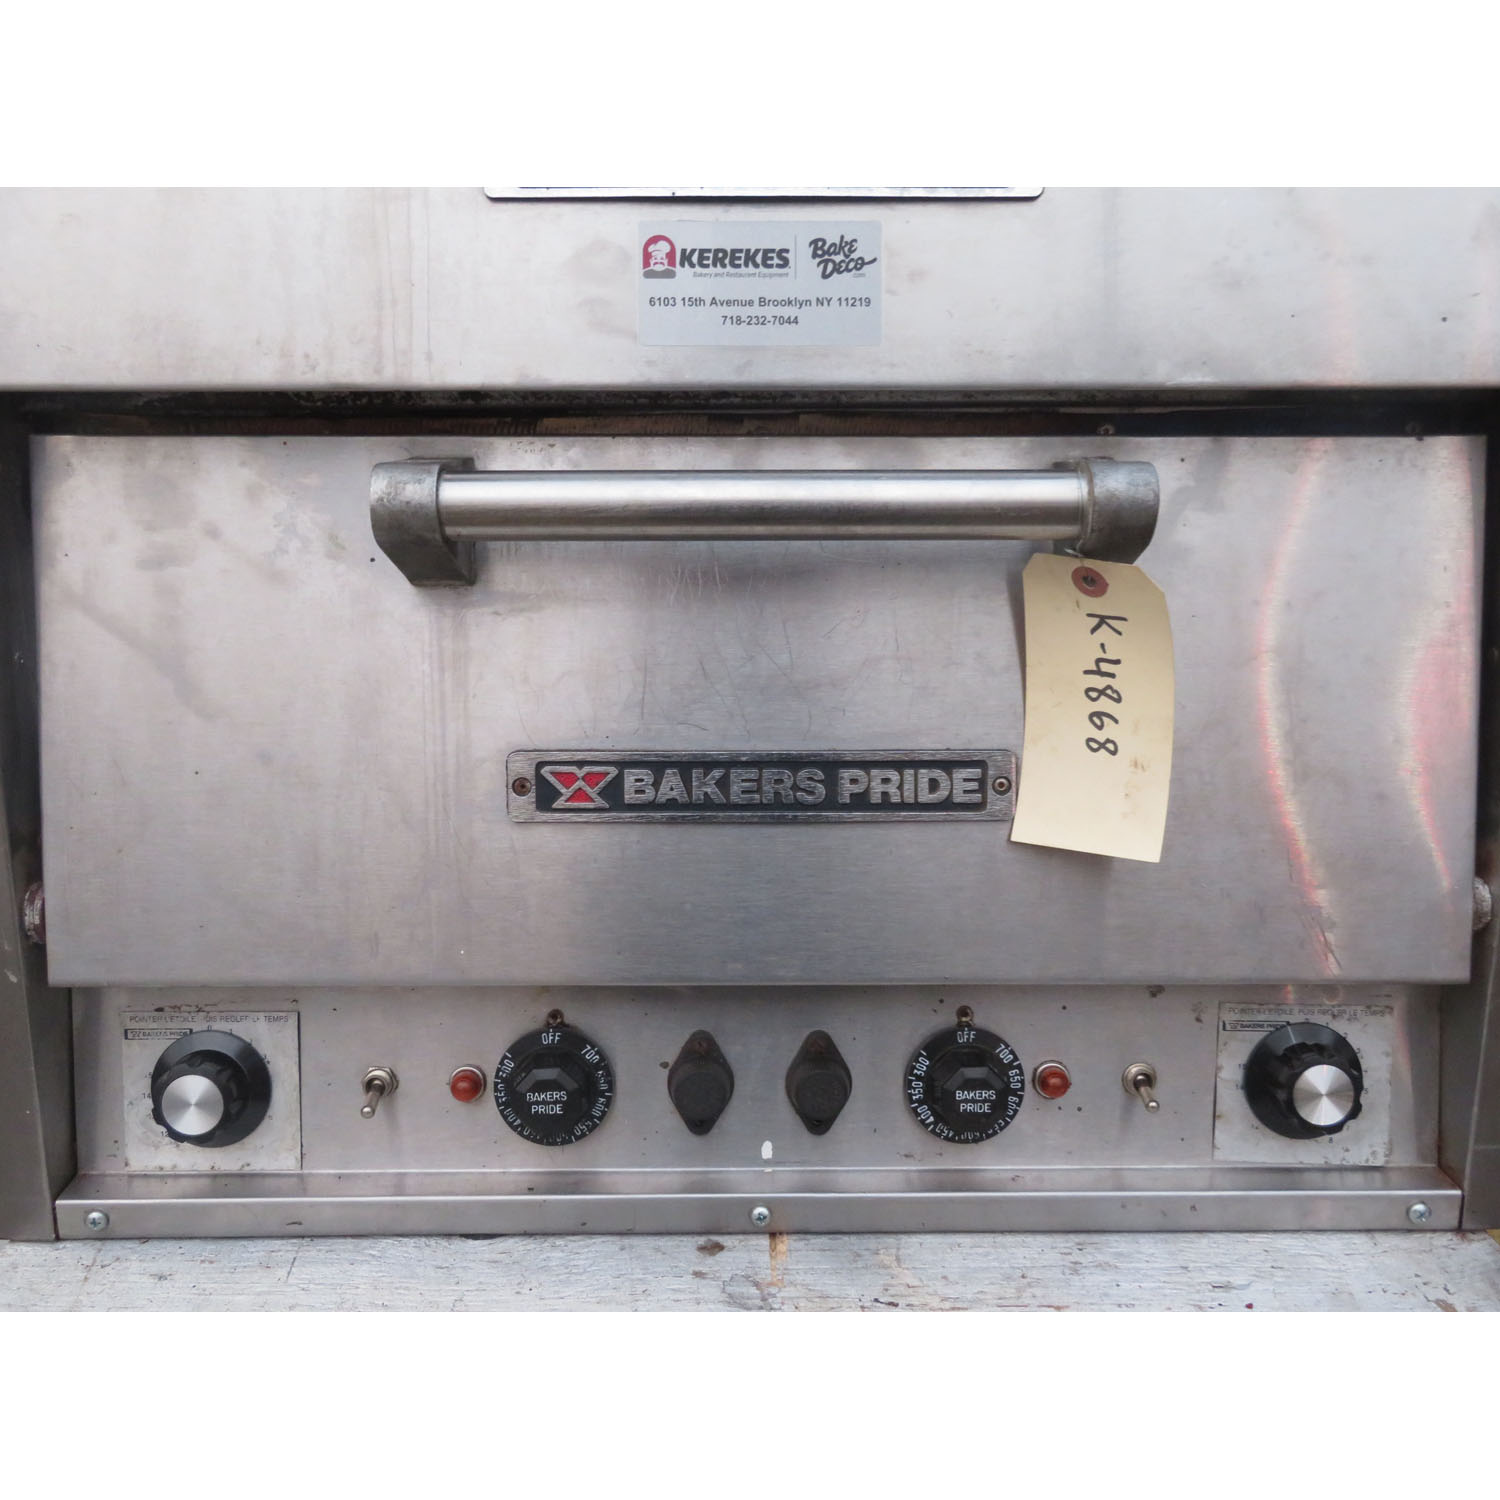 Bakers Pride DP-2 Tabletop Electric Pizza Oven, Used Very Good Condition image 1